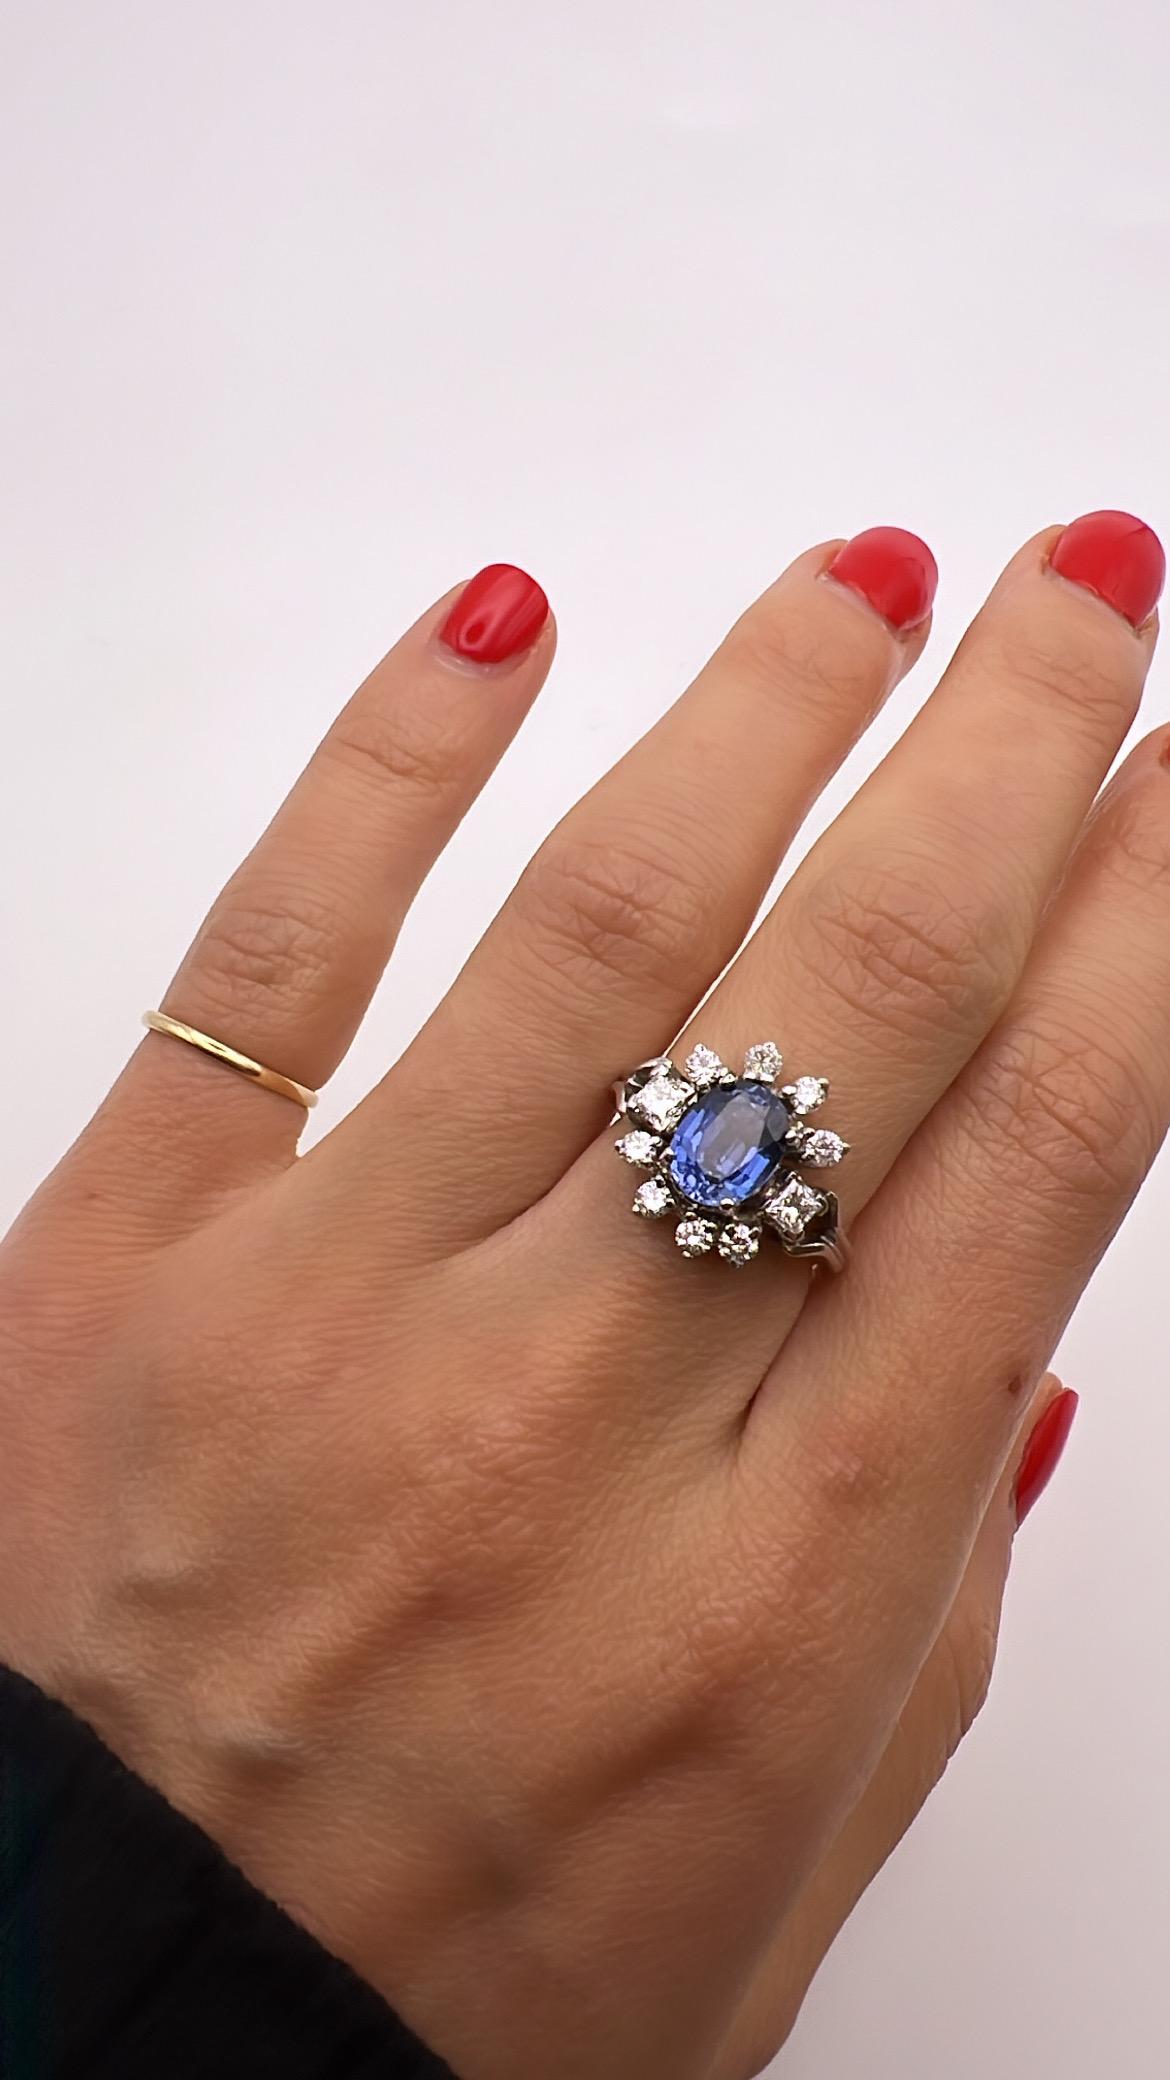 beautiful 18k white gold ring with blue sapphire .
the main stone surrounded by 8 brilliant cut diamond and 2 princess cut diamonds ,approximately 0.60
the diamonds are H color and Vs in clarity.